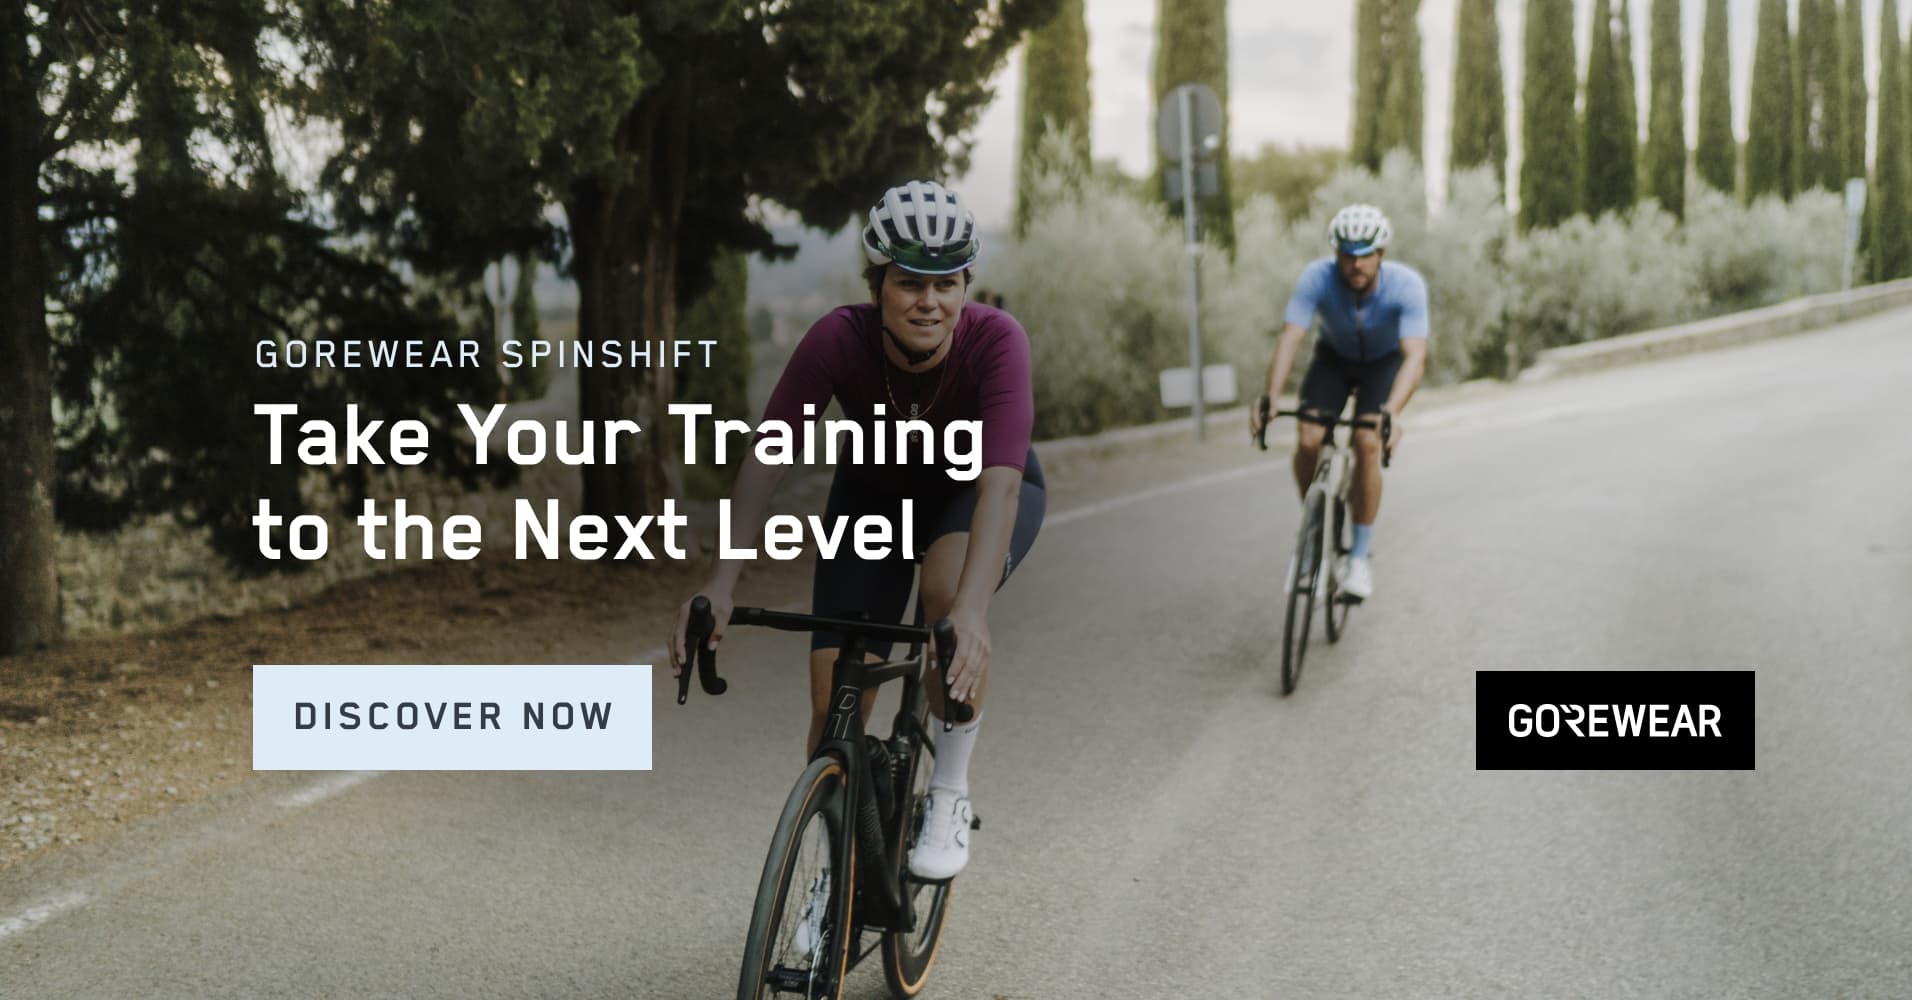 Gorewear Spinshift - Take Your Training to the Next Level